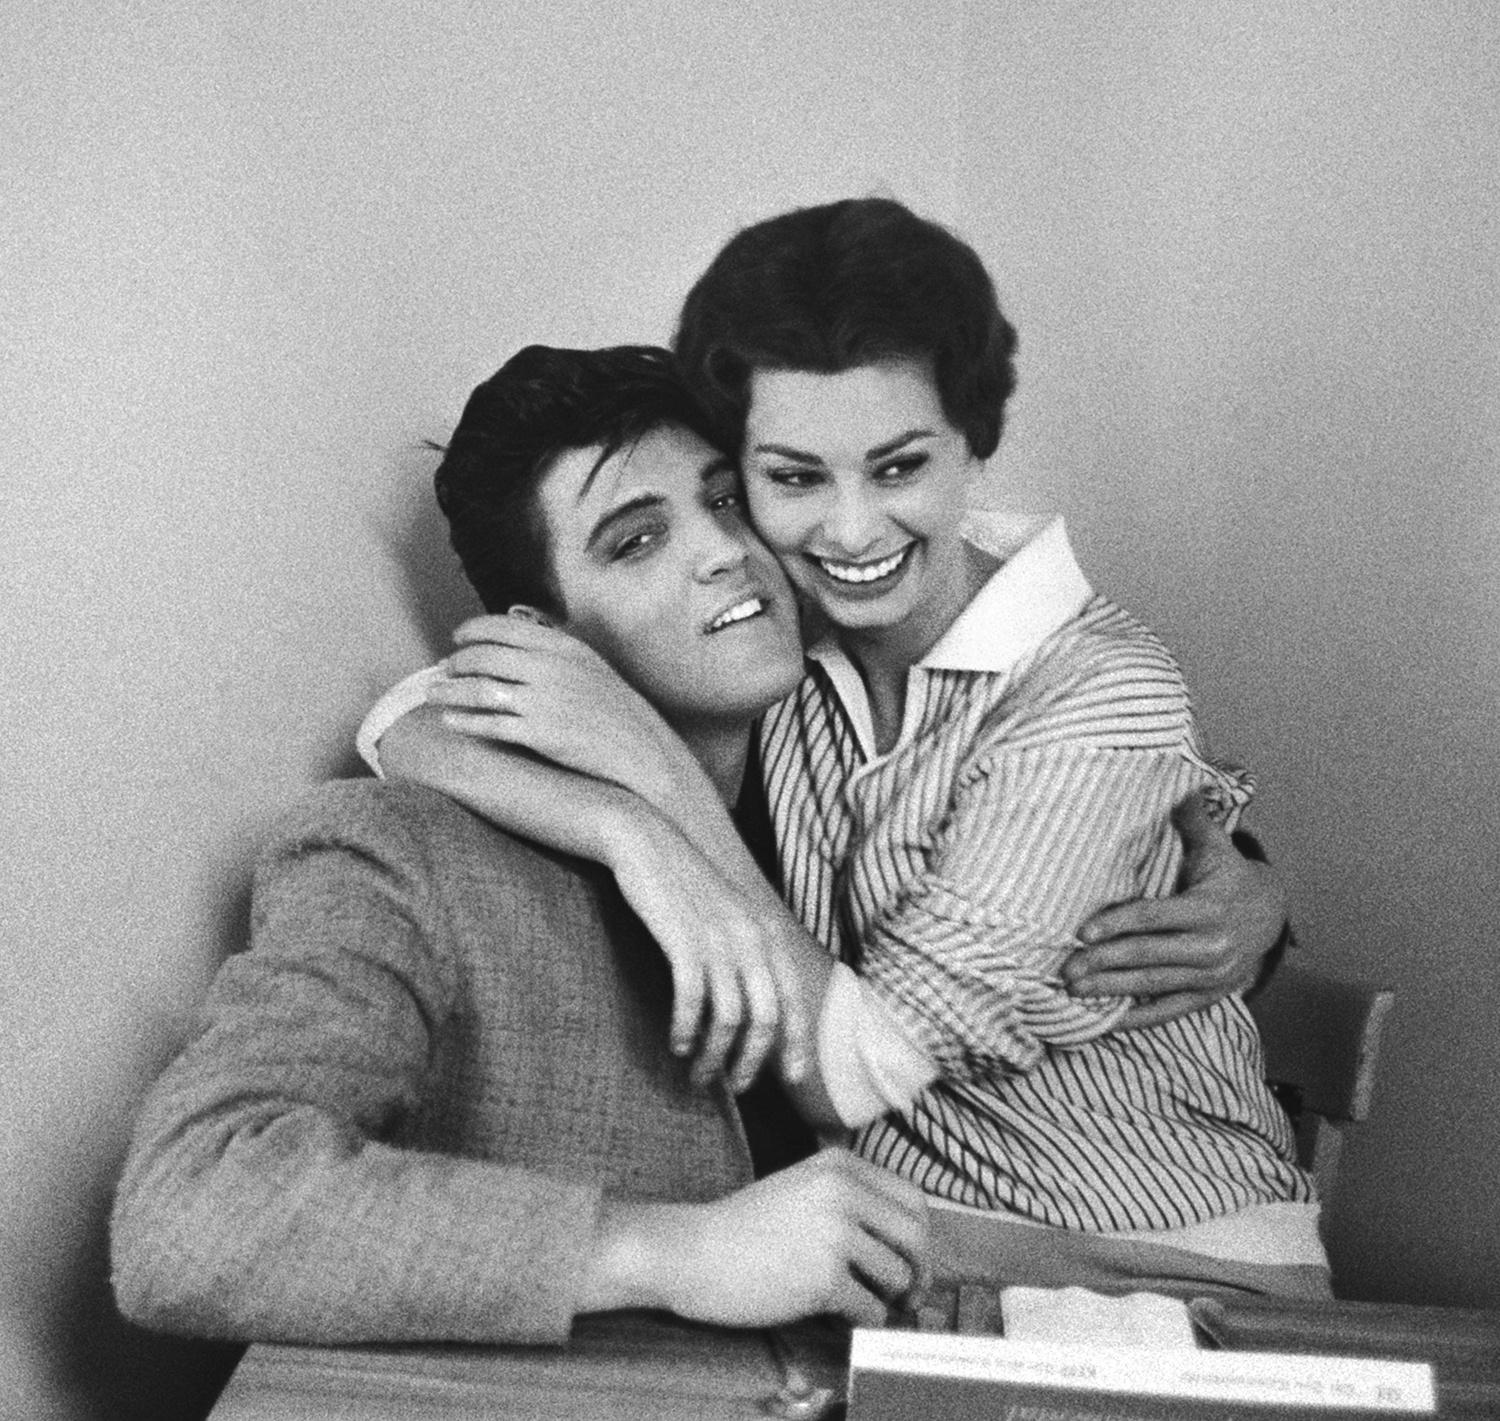 Elvis Presley and Sophia Loren, 1958  - Bob Willoughby (Portrait Photography)
Worldwide Shipping Available
Signed by Christopher Willoughby, executor of the Estate, inscribed with title and photographer's copyright information, numbered and stamped